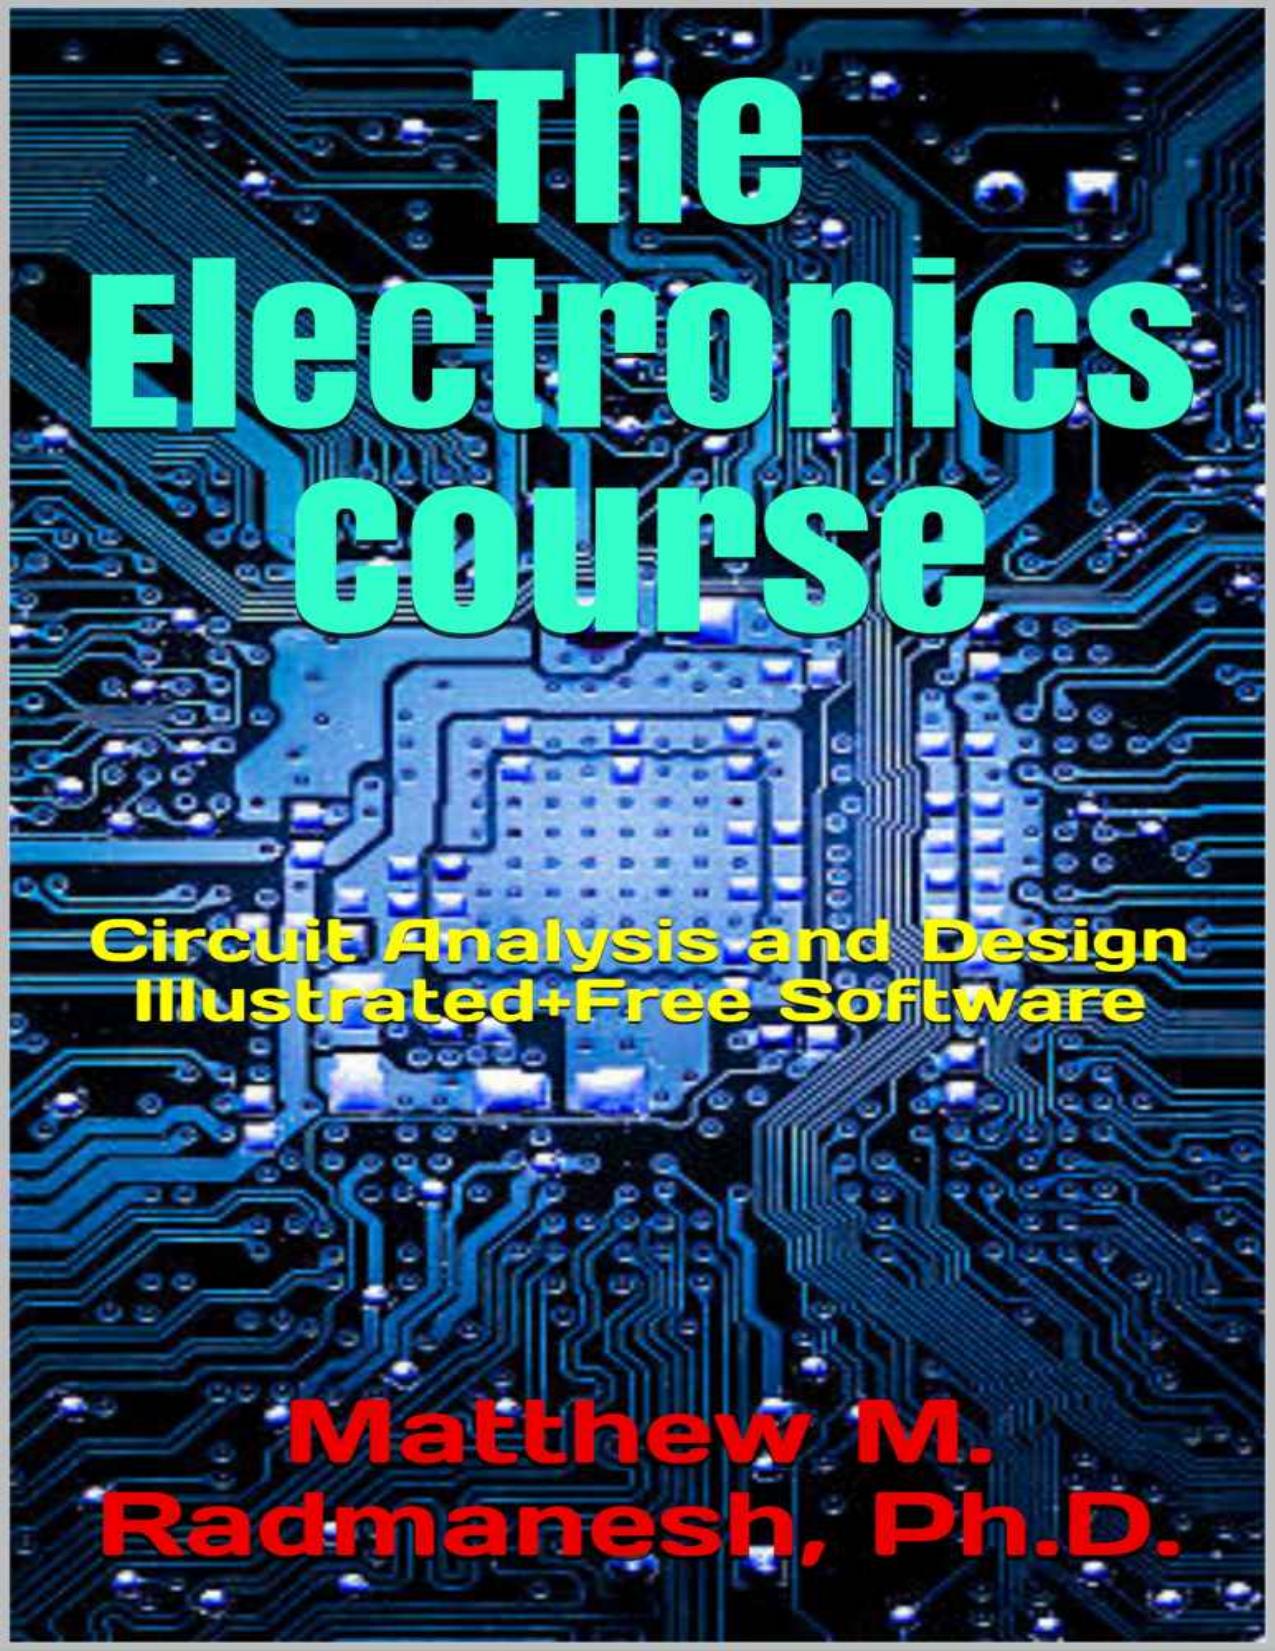 The Electronics Course: Circuit Analysis and Design Illustrated+Free Software by Matthew M. Radmanesh Ph.D